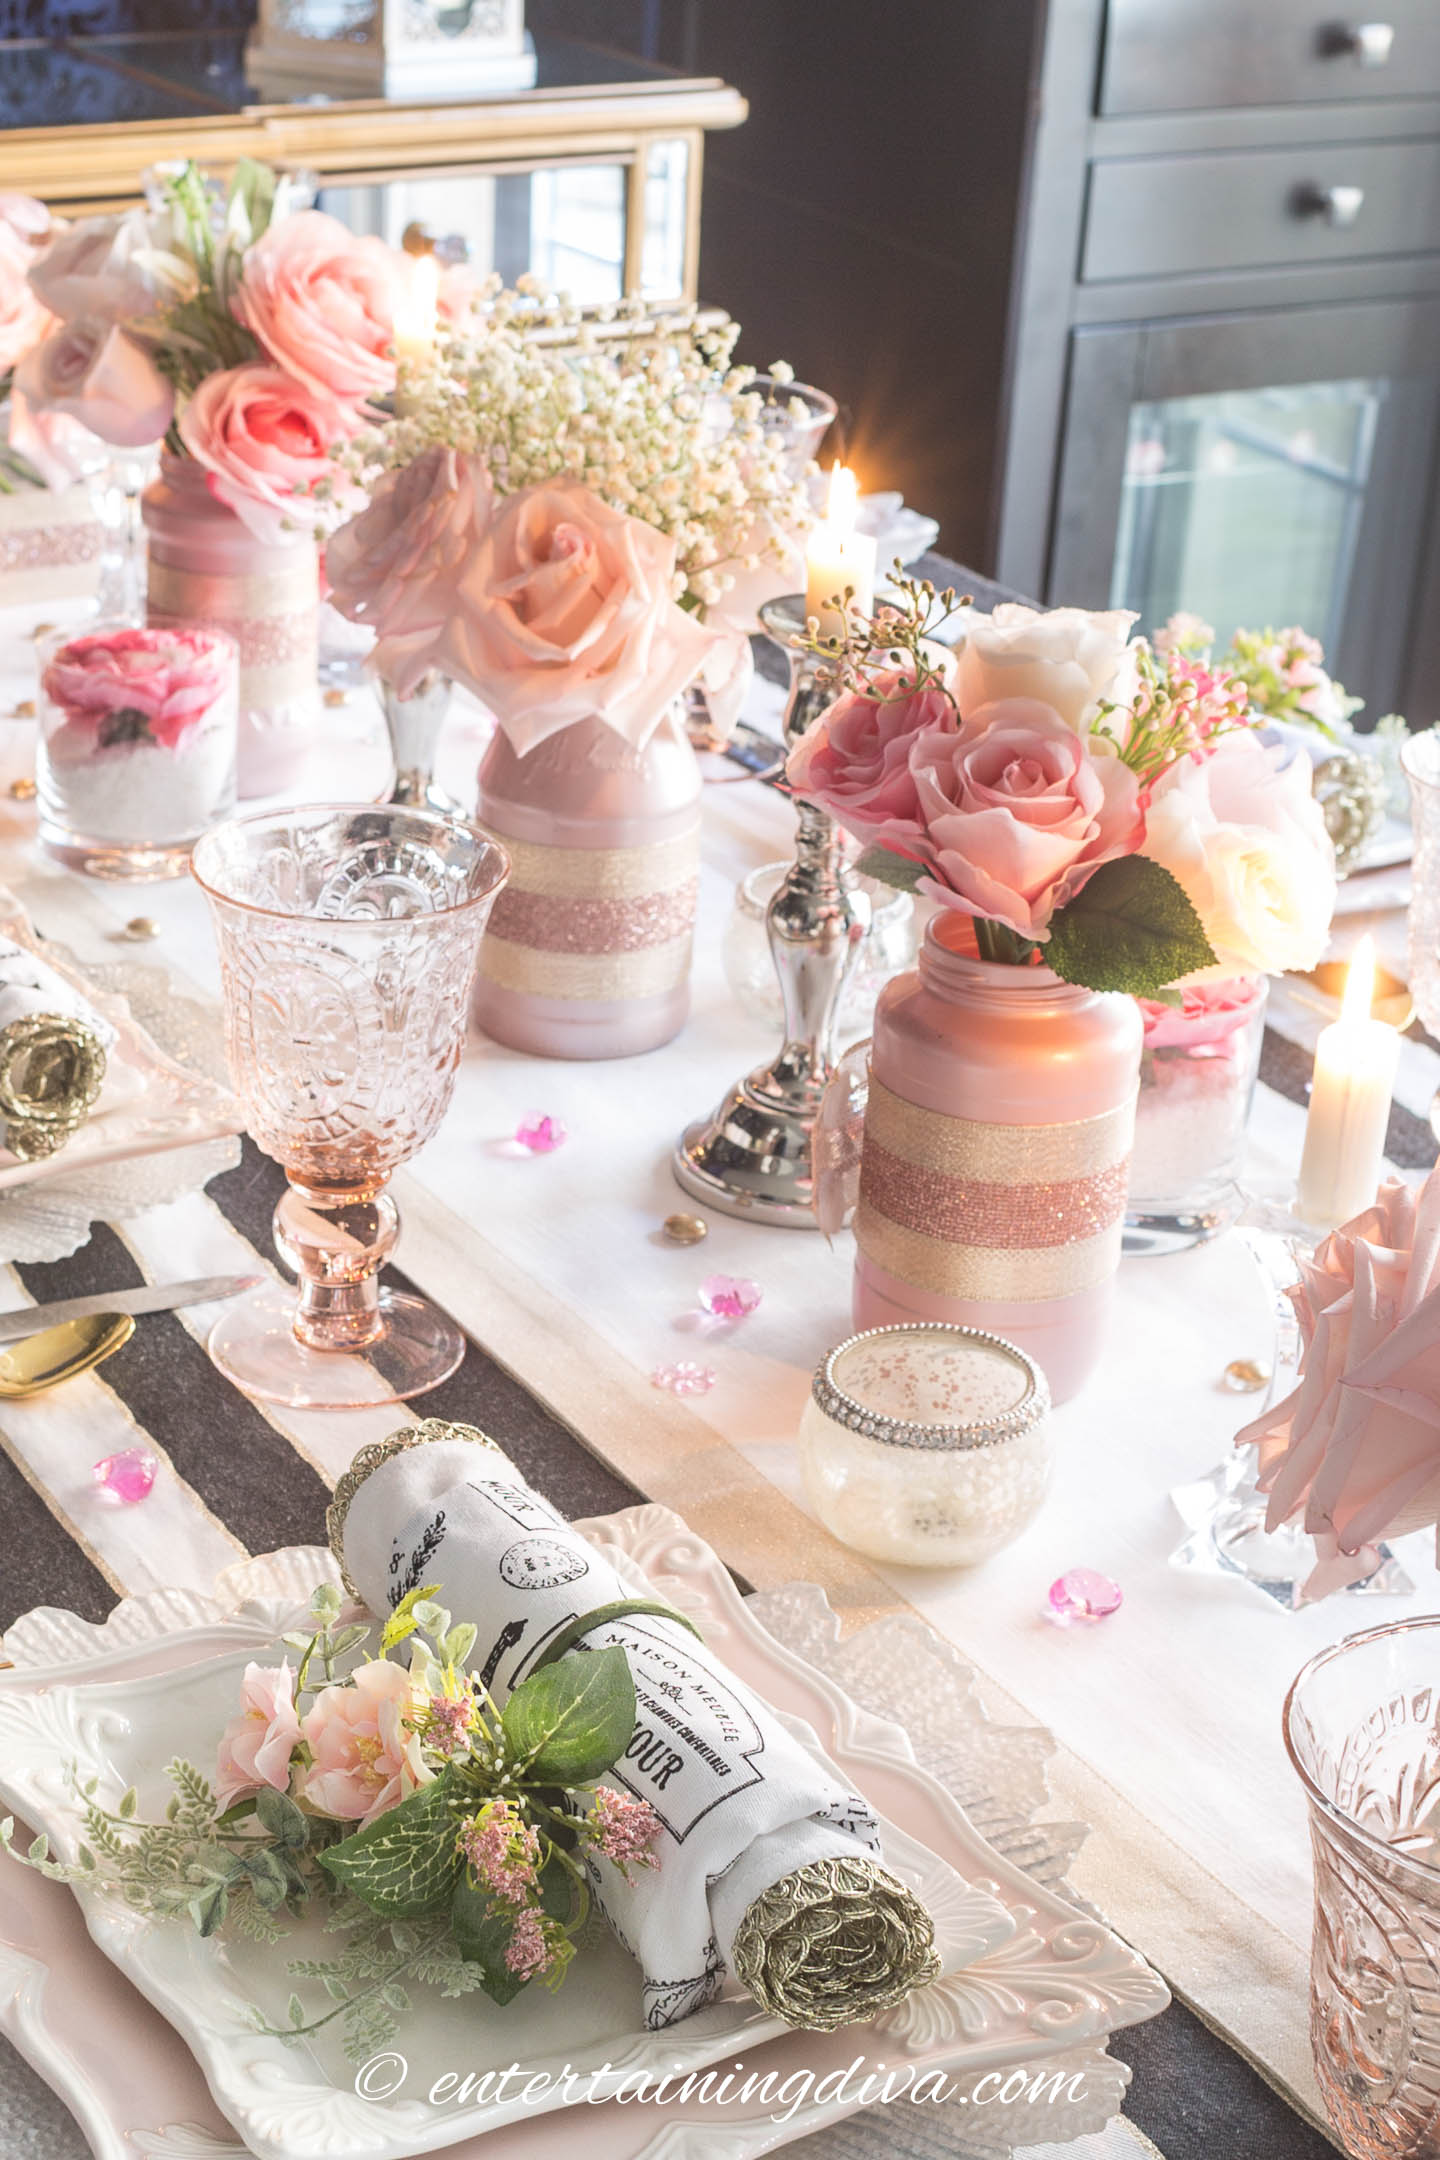 Blush pink floral centerpiece with roses